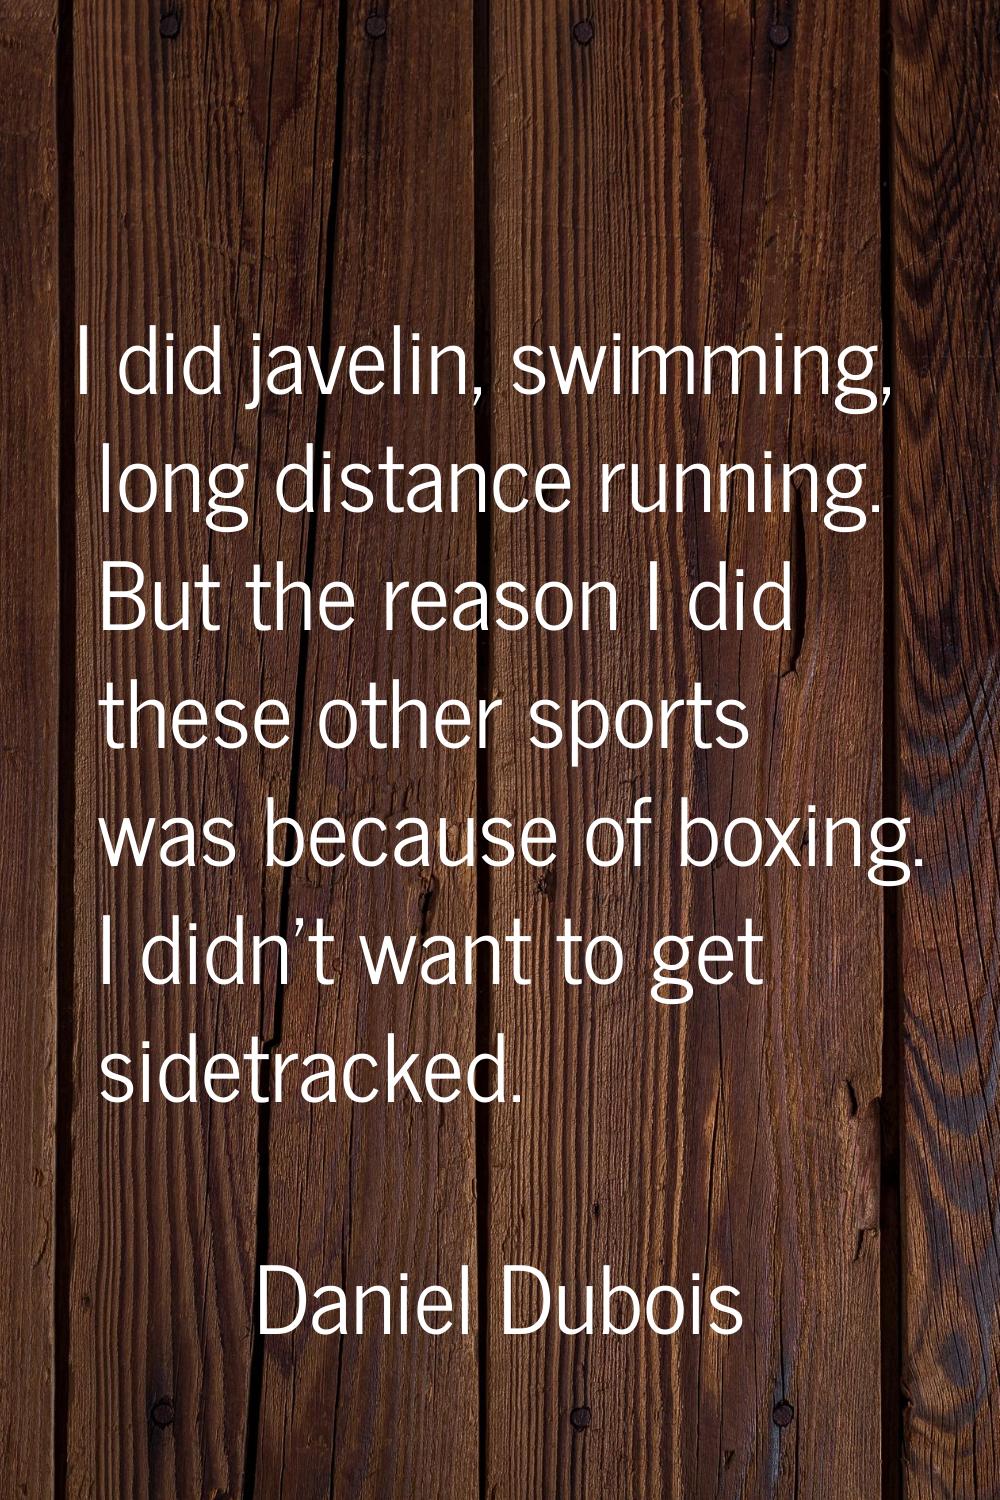 I did javelin, swimming, long distance running. But the reason I did these other sports was because